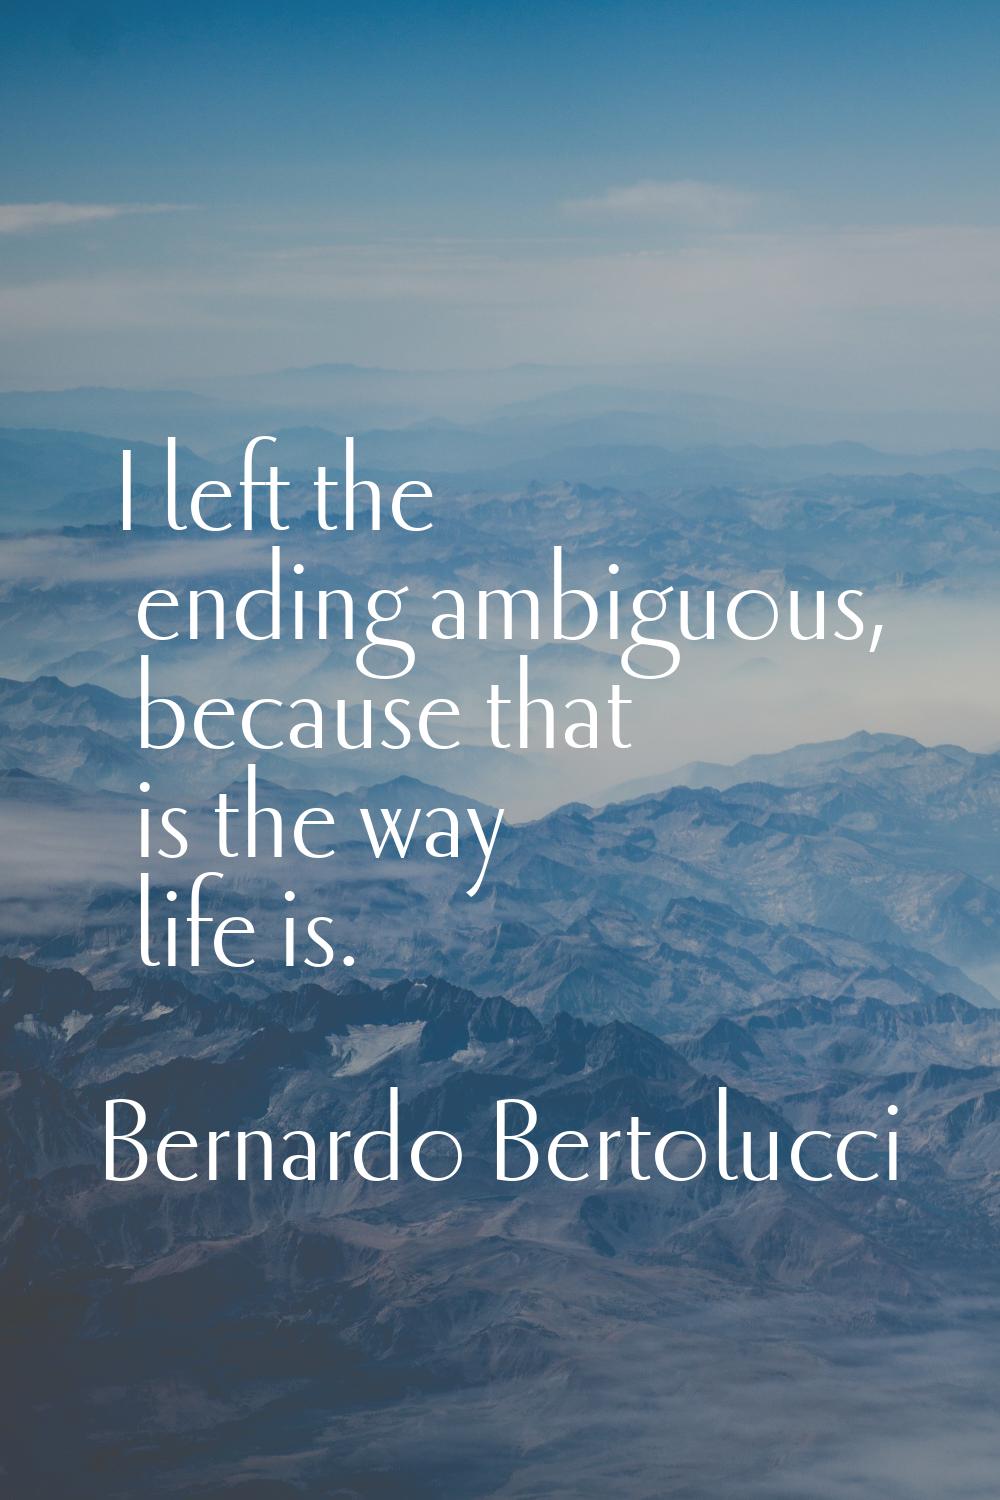 I left the ending ambiguous, because that is the way life is.